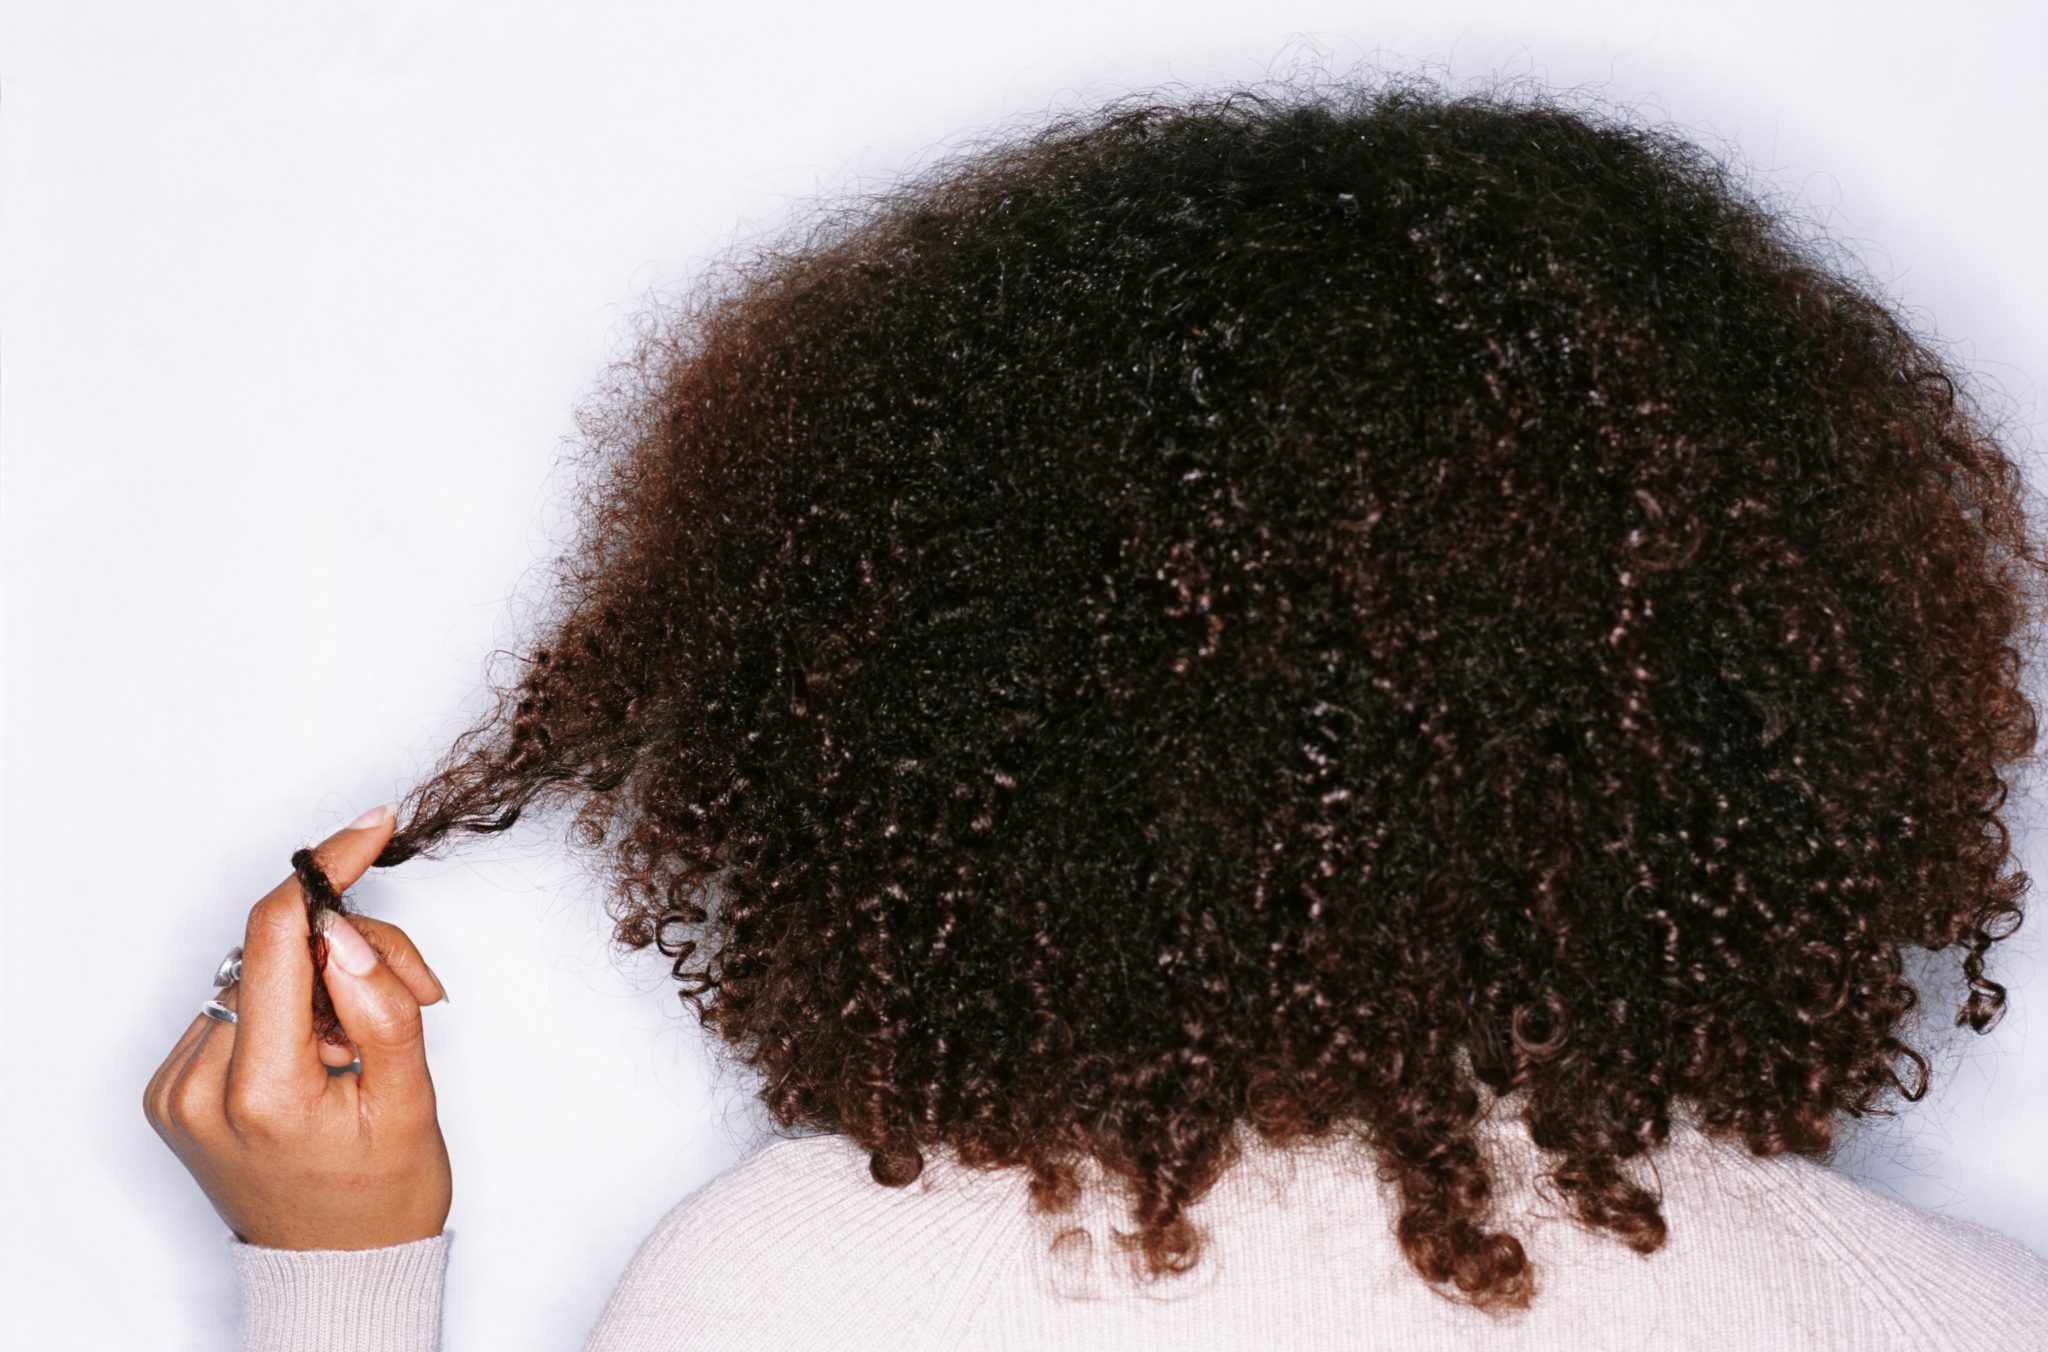 How to keep your hair hydrated and prevent breakage